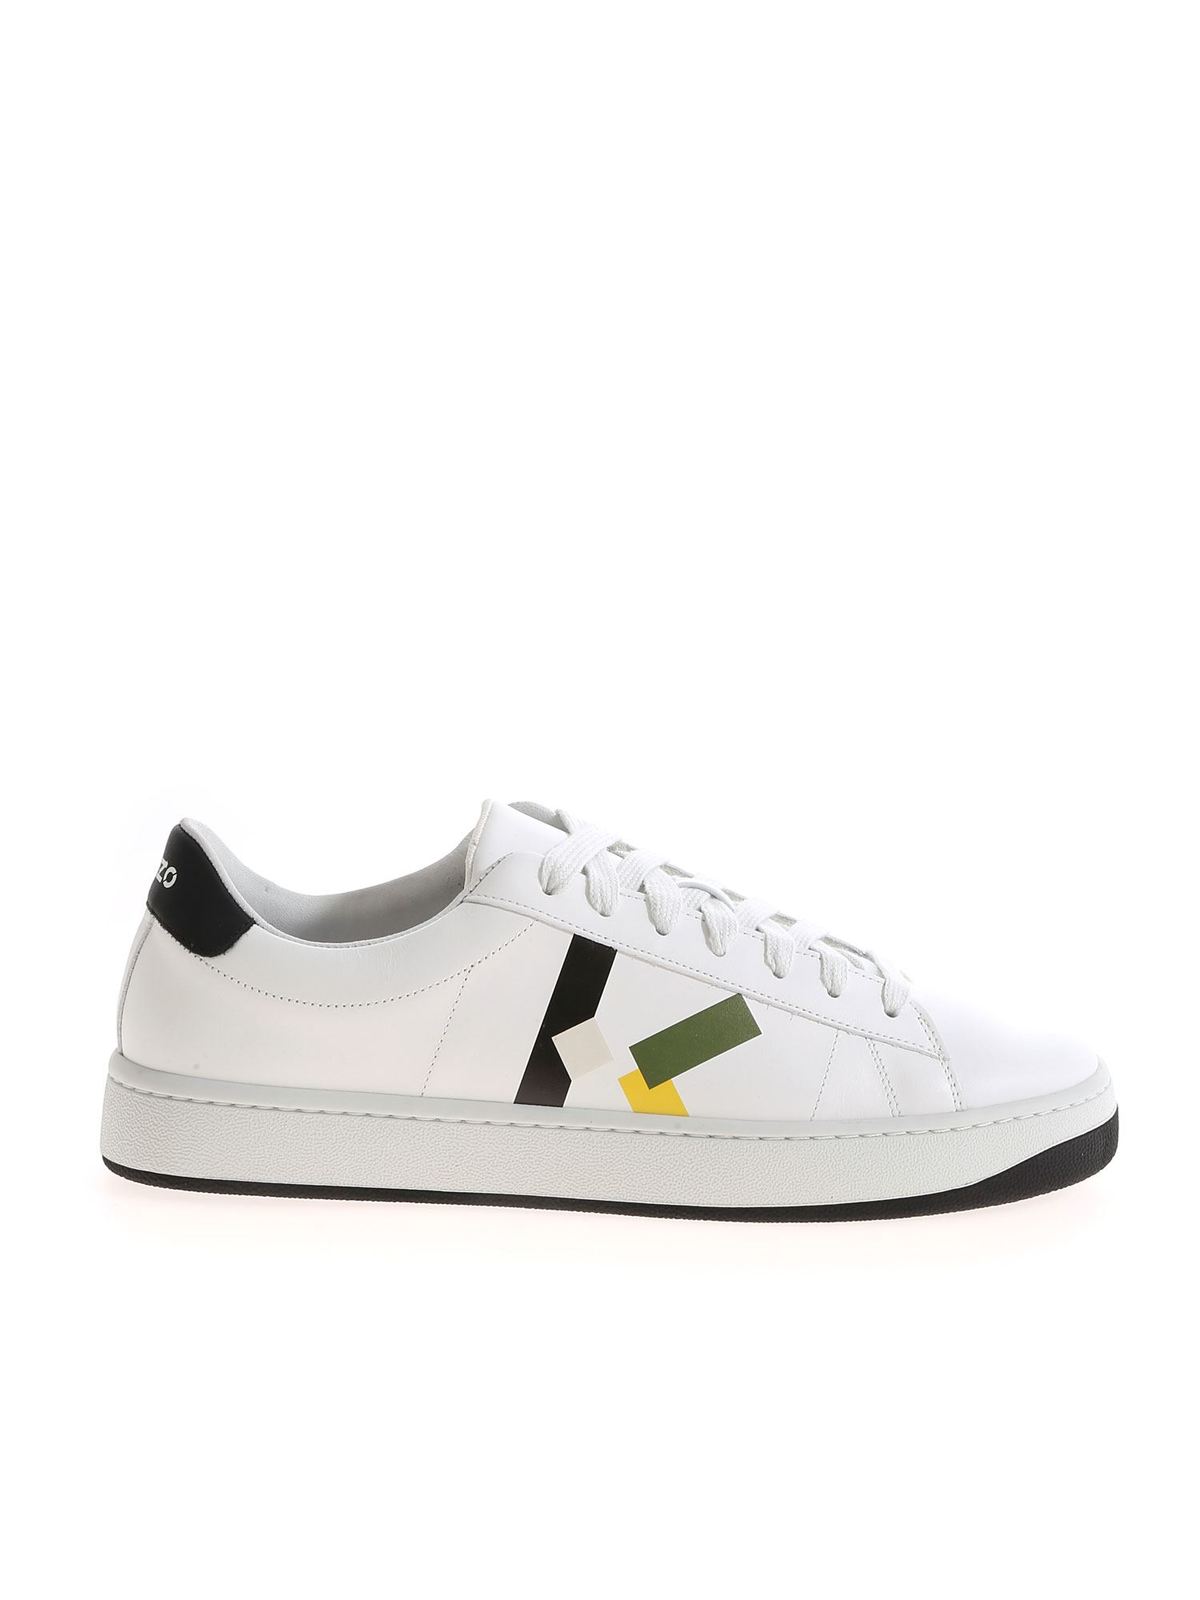 KENZO KOURT LACE UP SNEAKERS IN WHITE